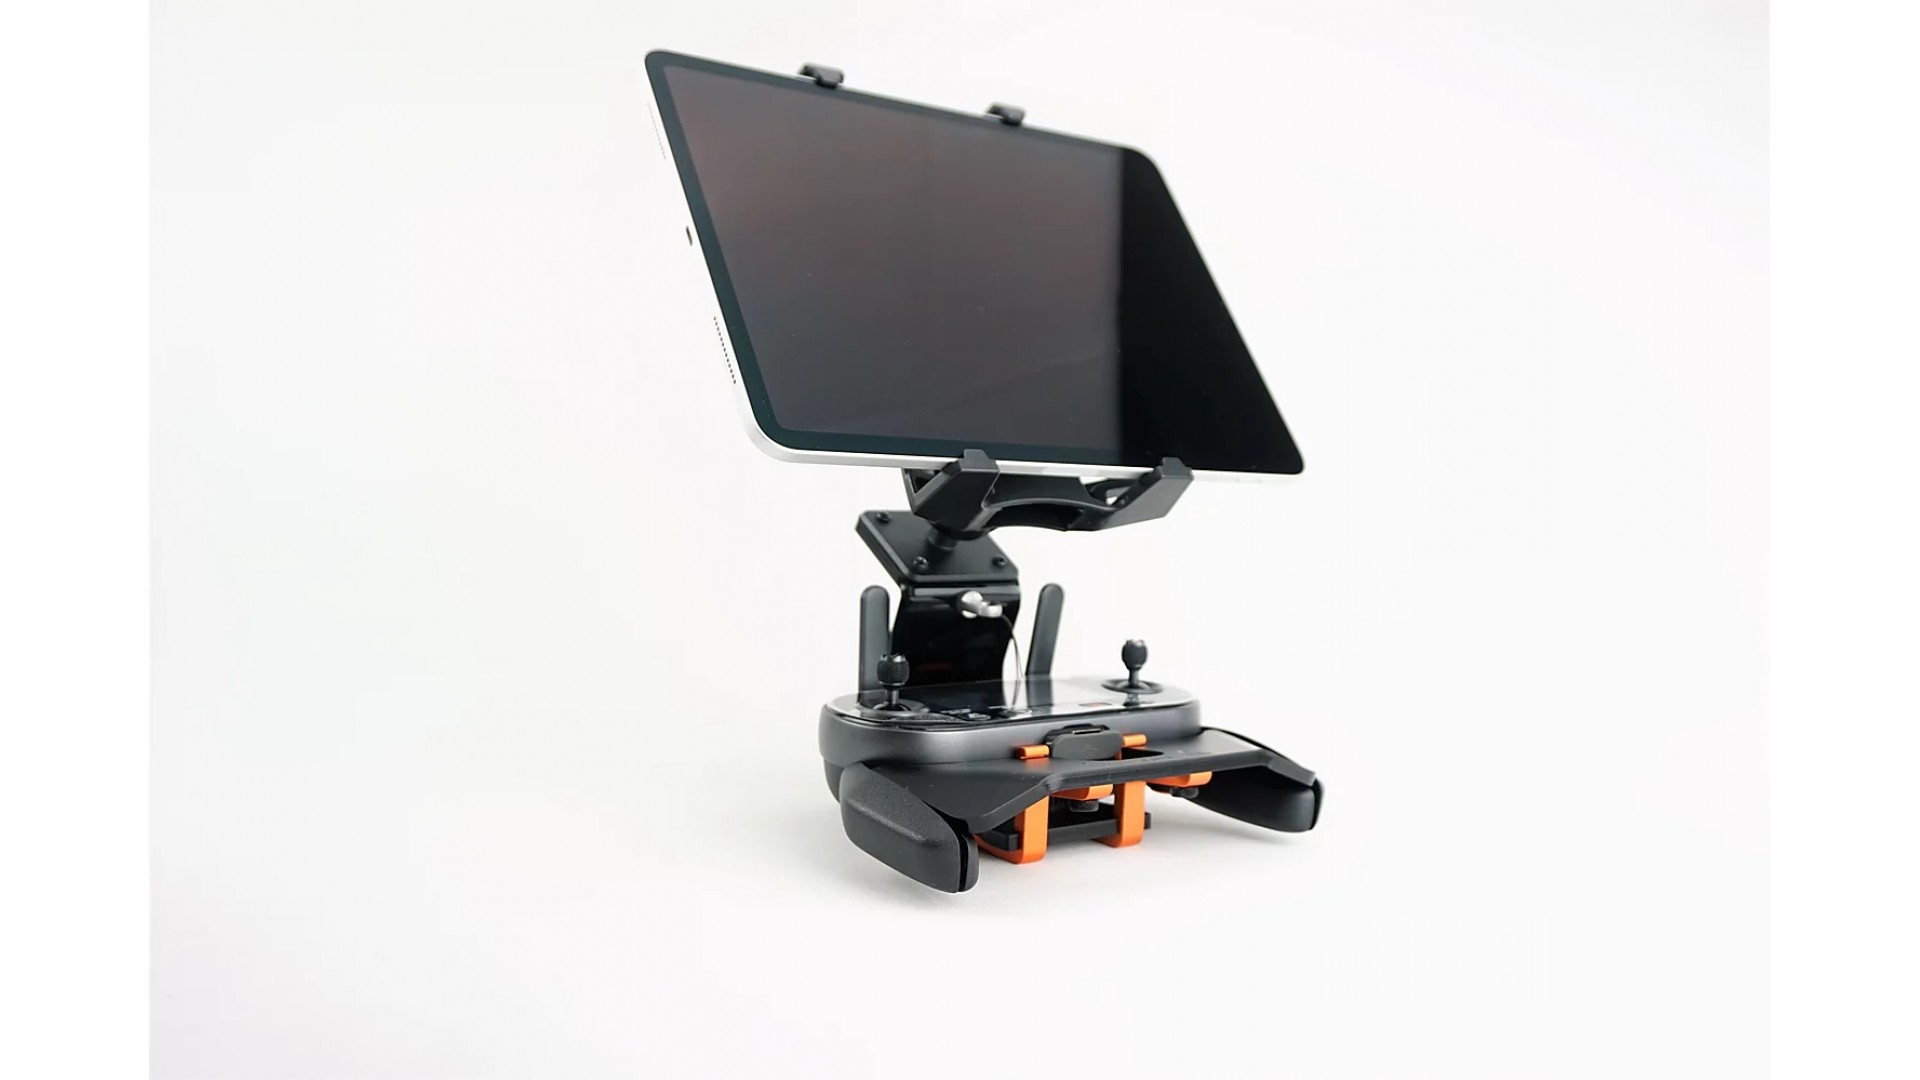 TDW LifThor Mjolnir Tablet Stand for the Autel EVO 2 Remote